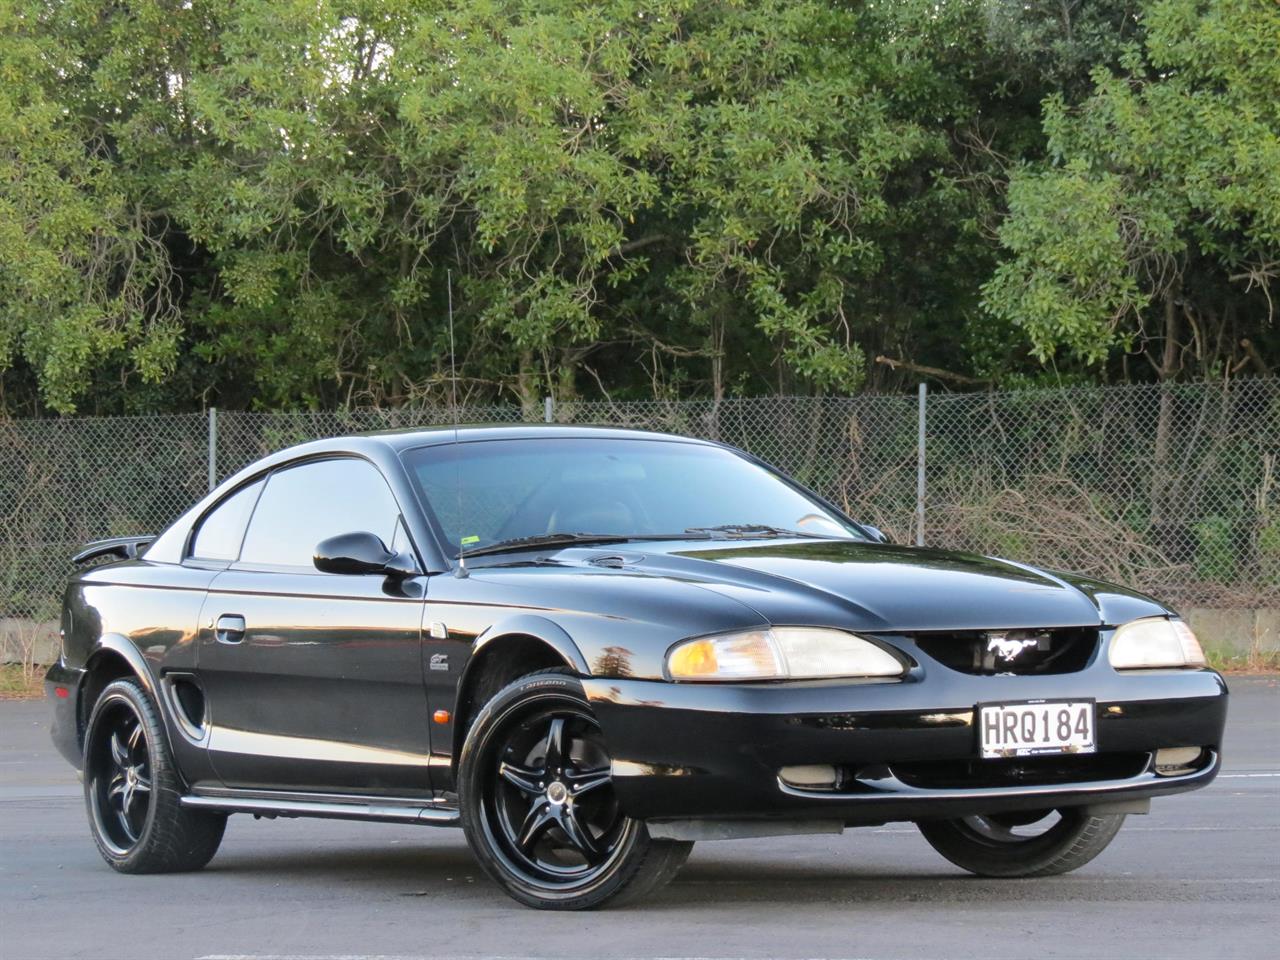 NZC 1994 Ford Mustang just arrived to Auckland